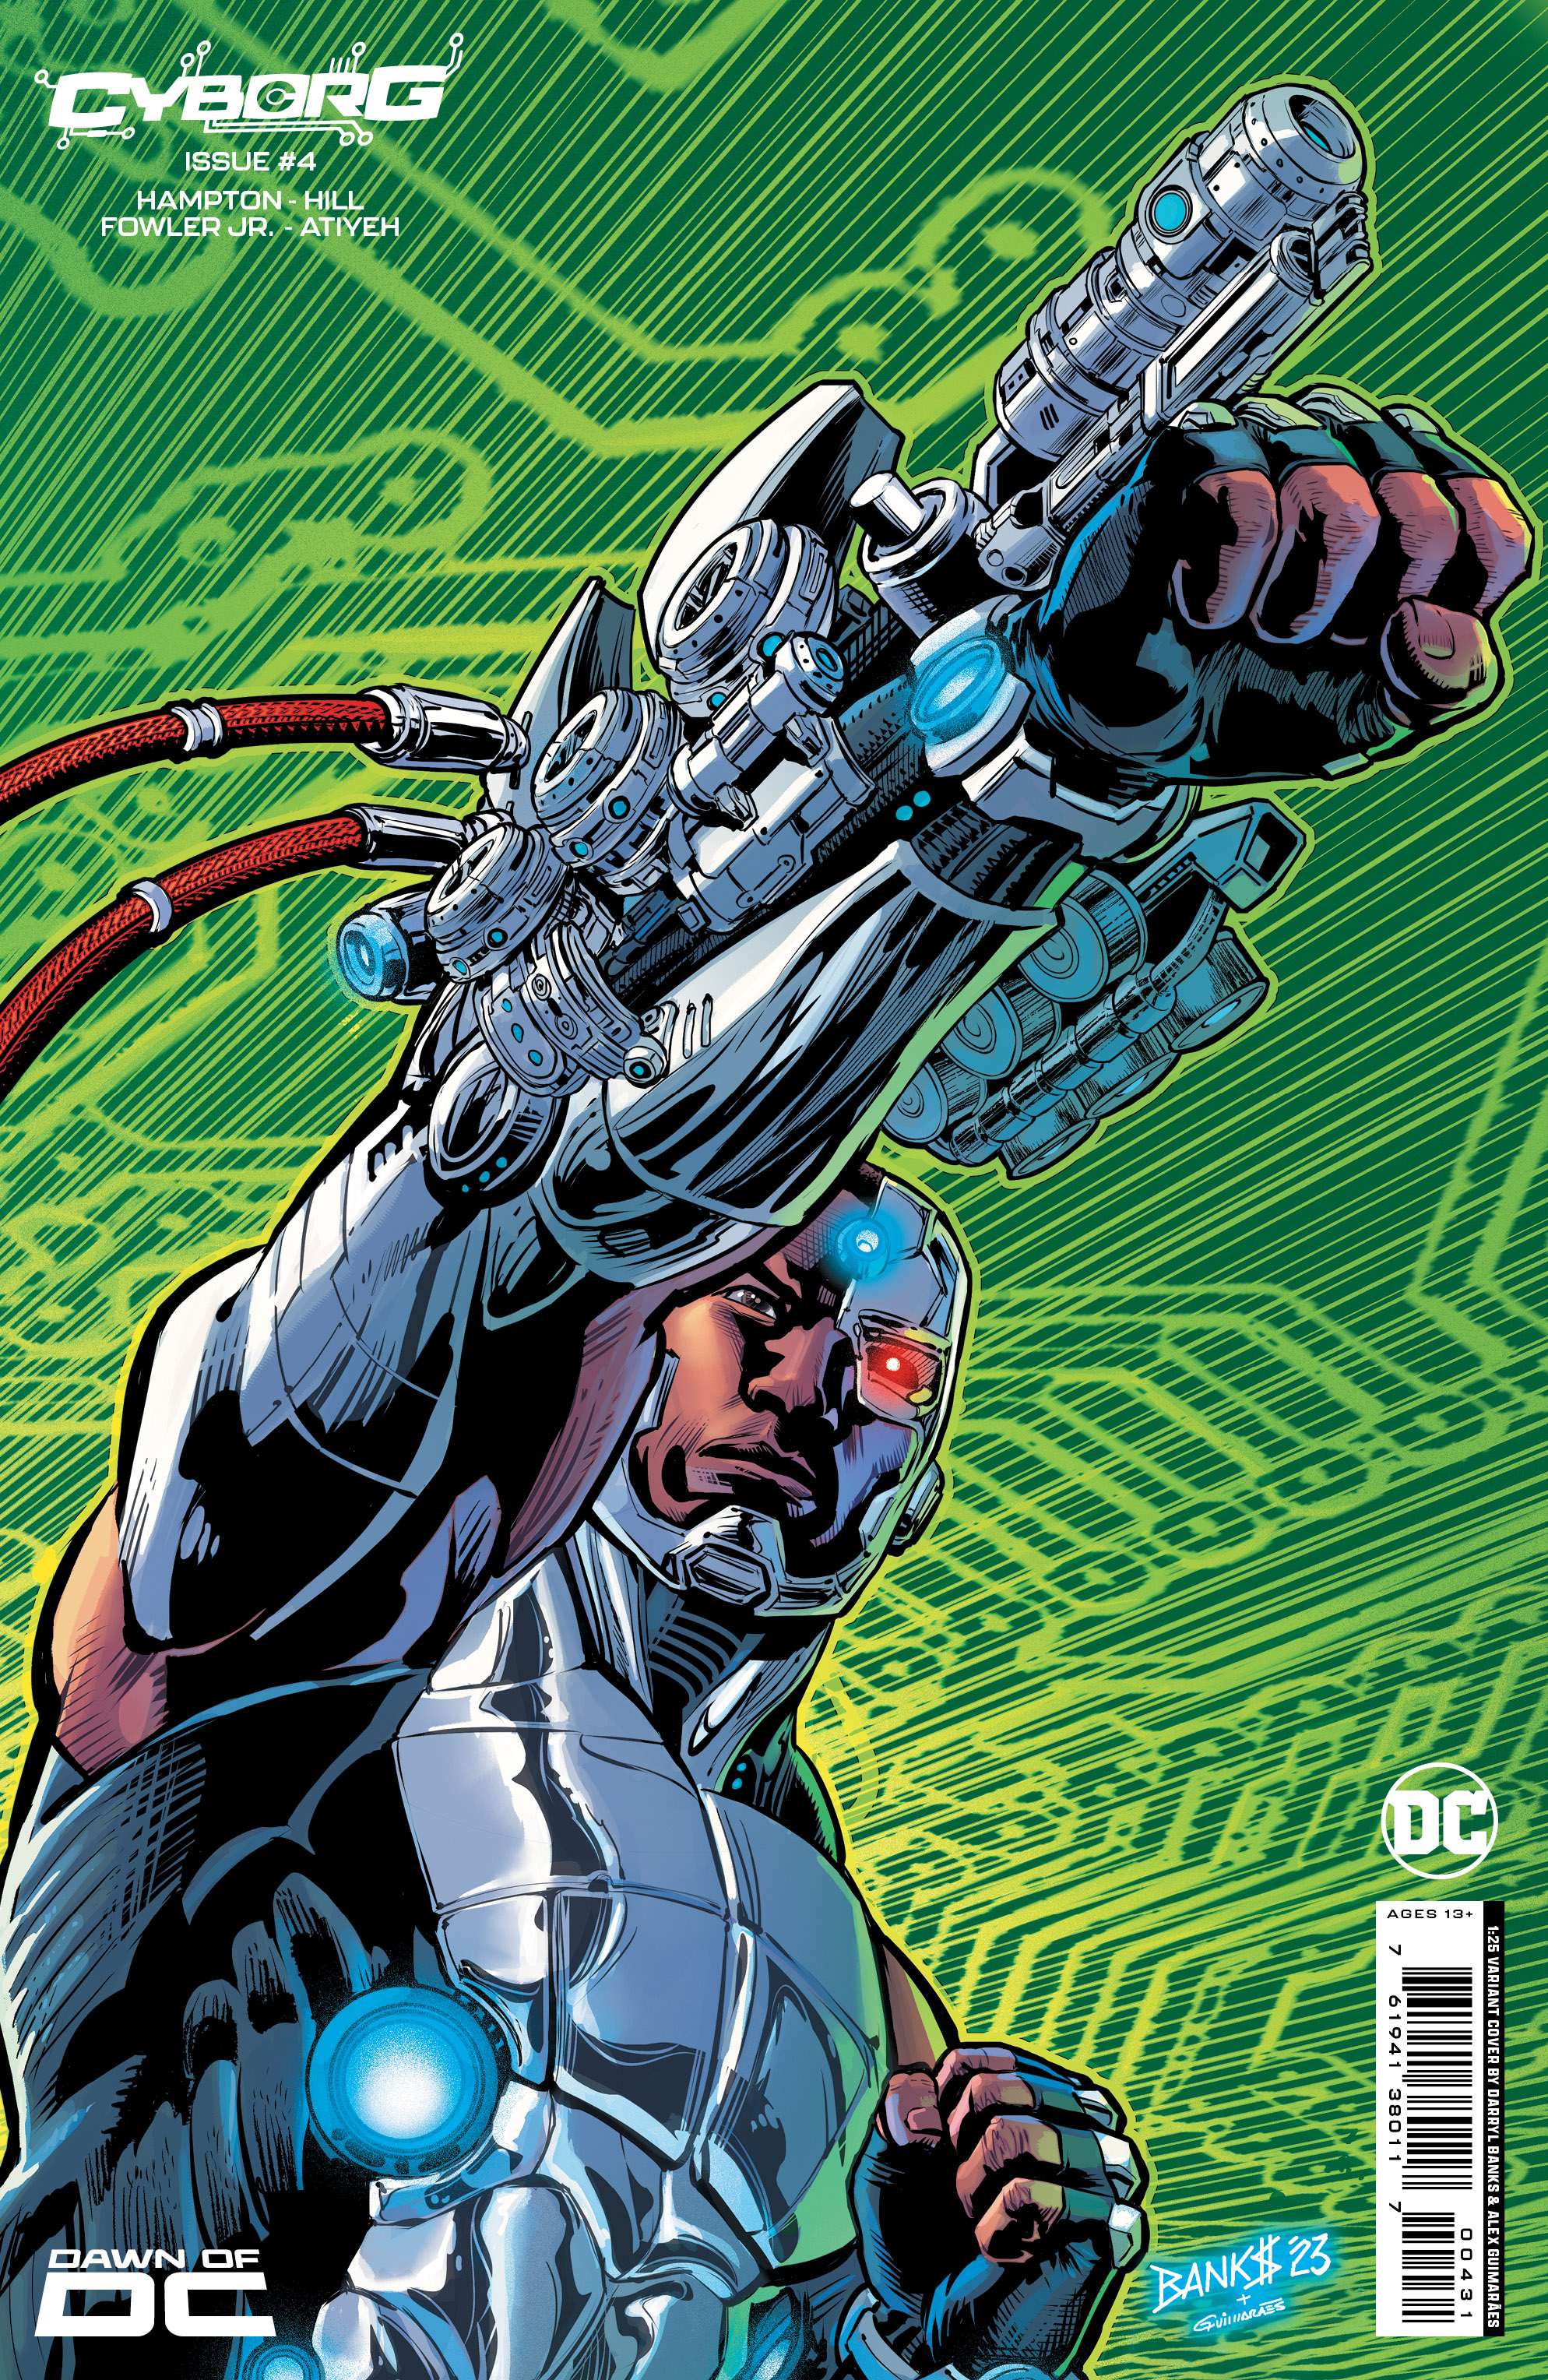 Cyborg #4 Cover C 1 for 25 Incentive Darryl Banks Card Stock Variant (Of 6)